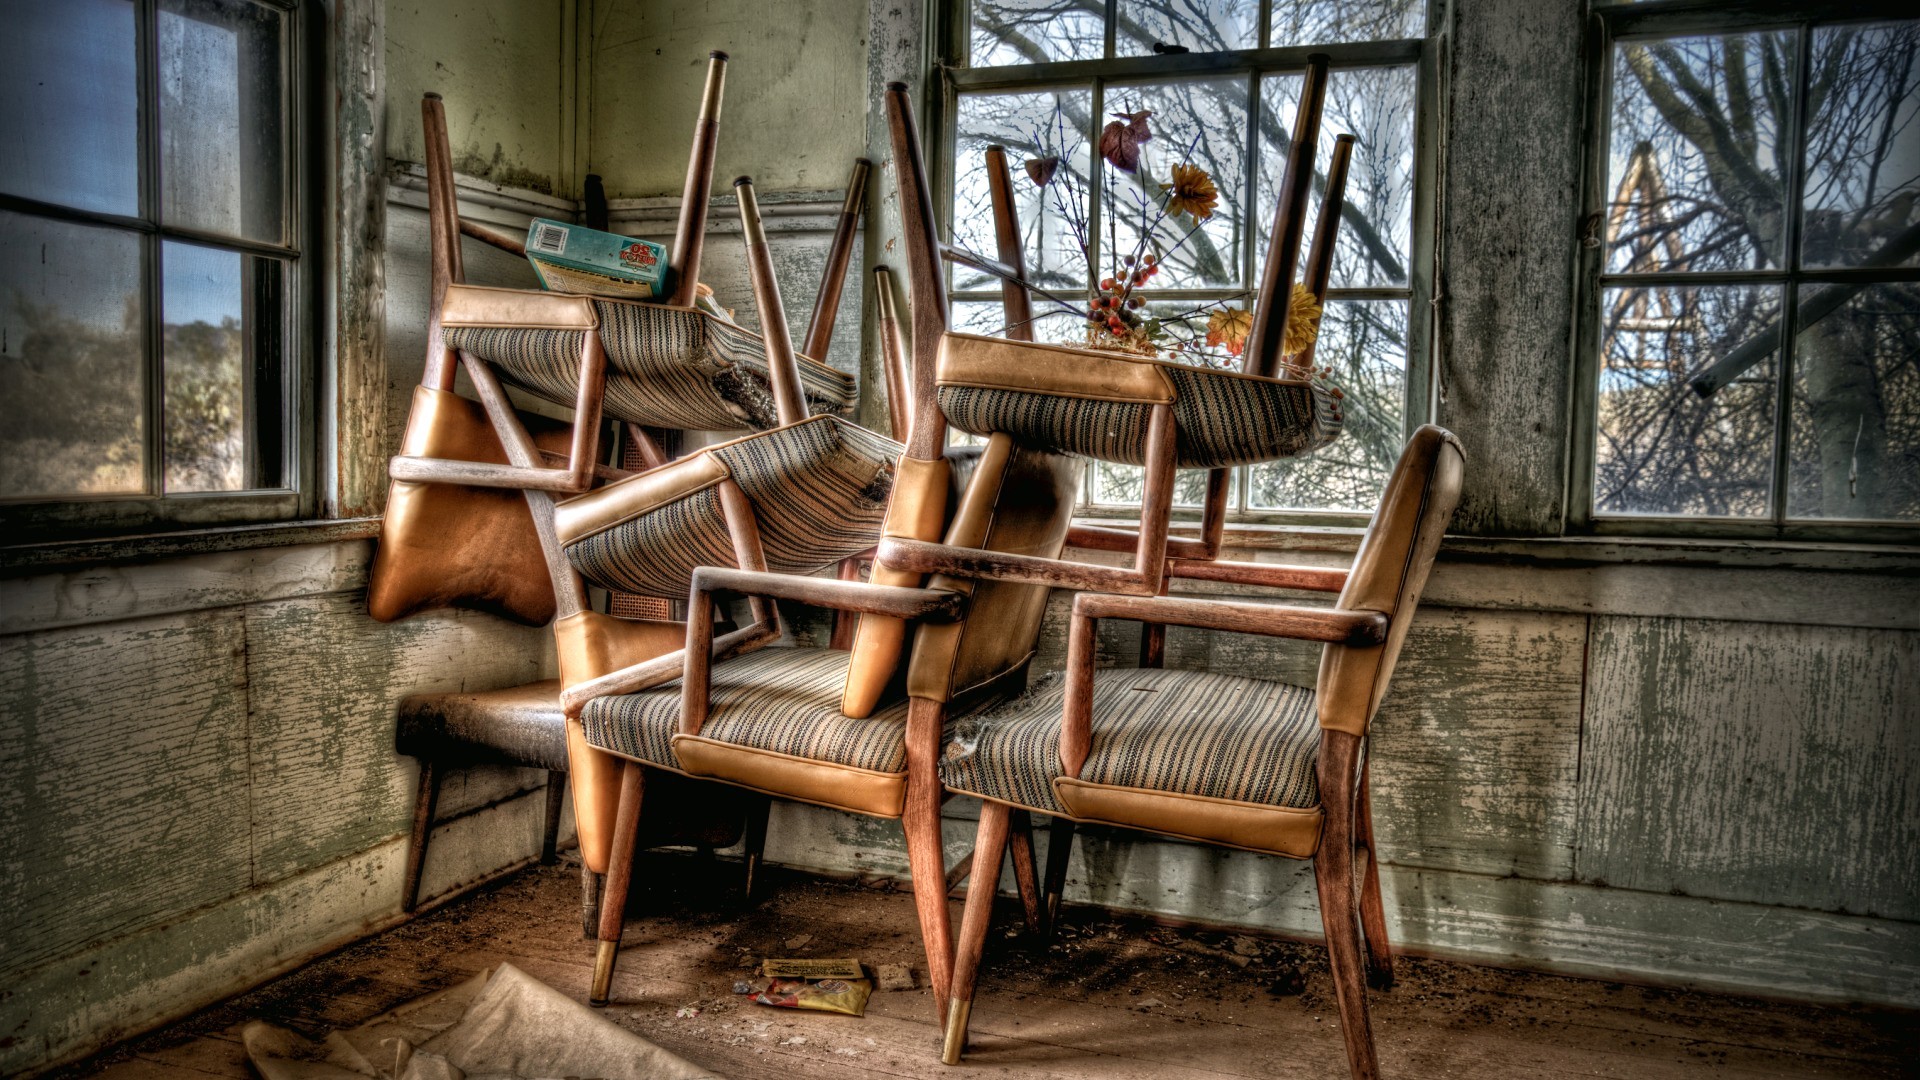 picture: windows, room, chairs (image)